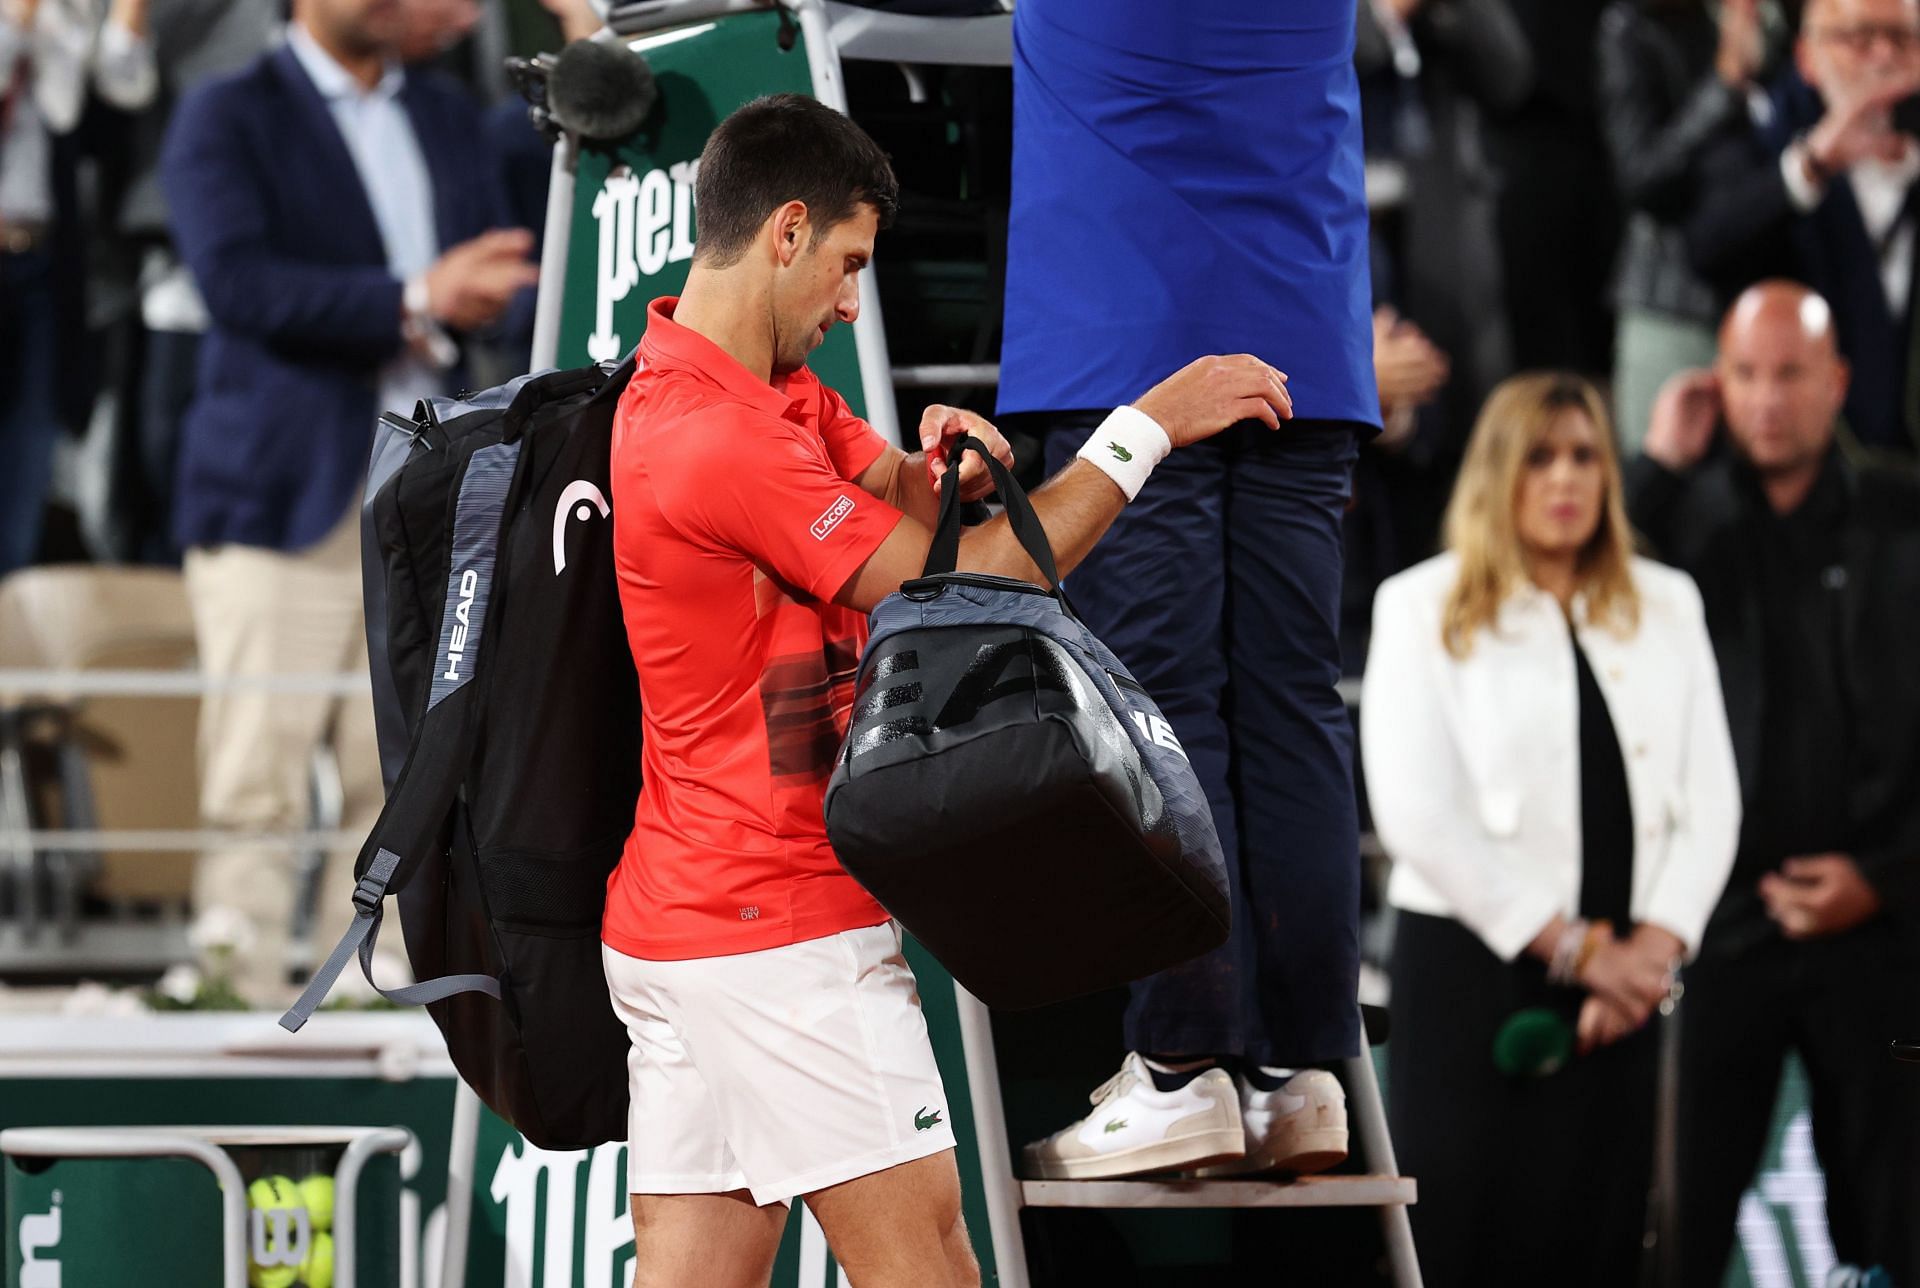 Novak Djokovic has officially withdrawen from National Bank Open 2022